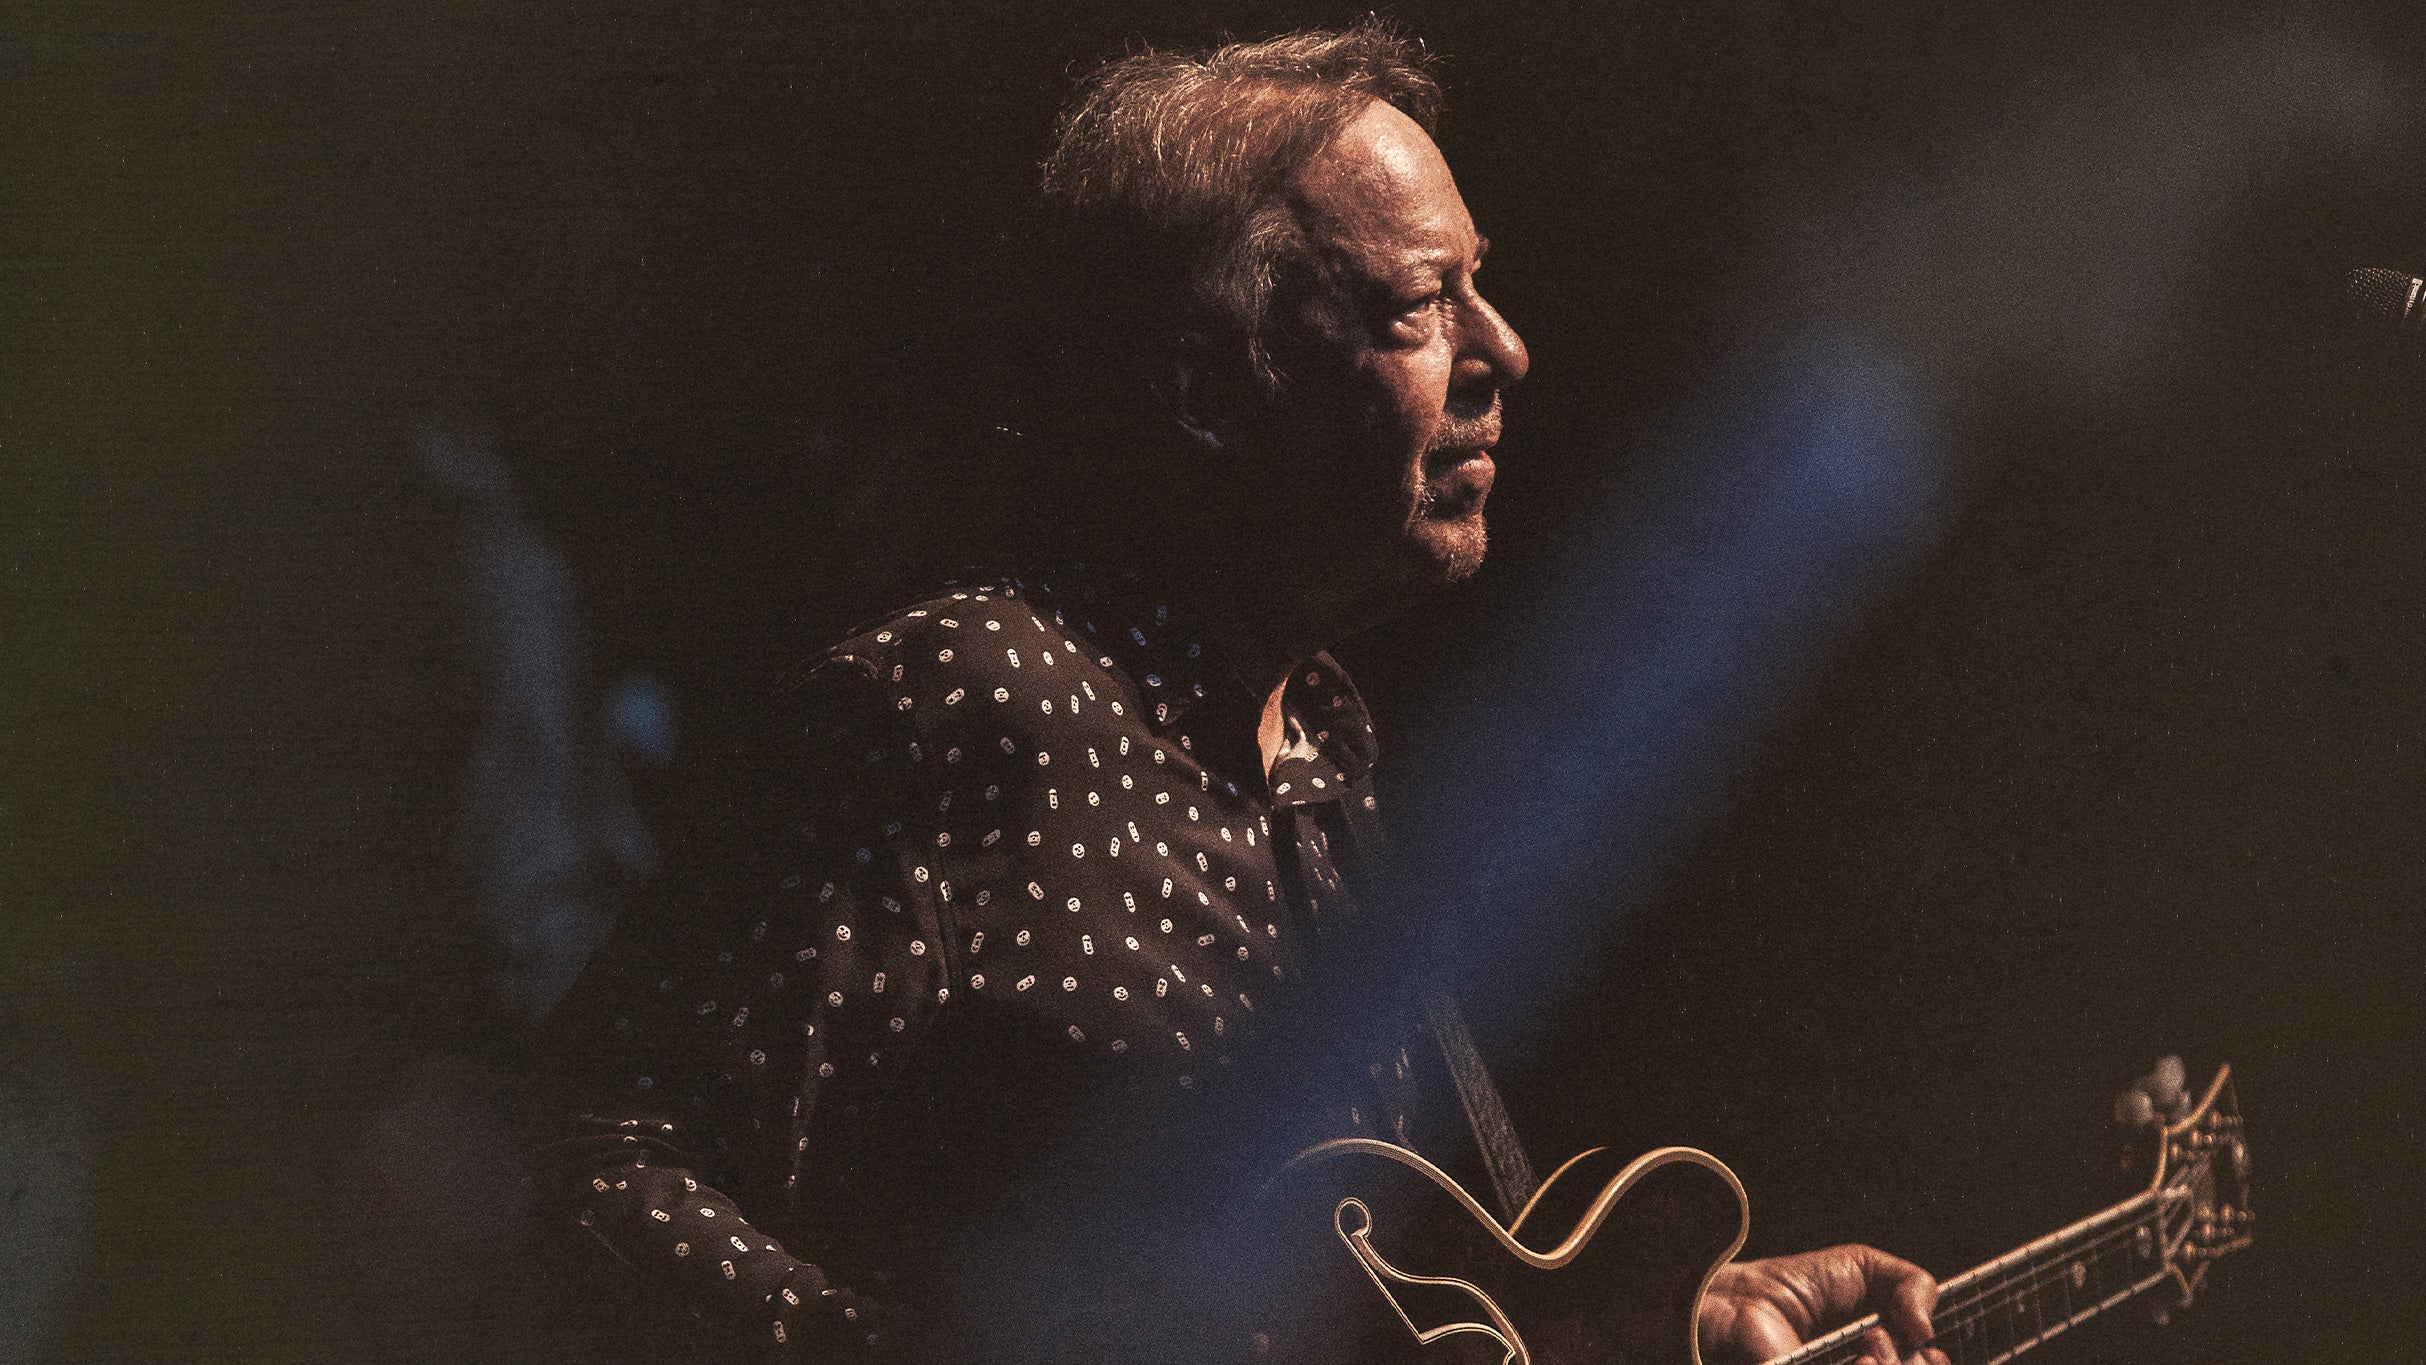 Boz Scaggs - Summer 23 Tour pre-sale code for performance tickets in Red Bank, NJ (Hackensack Meridian Health Theatre at the Count Basie Center )